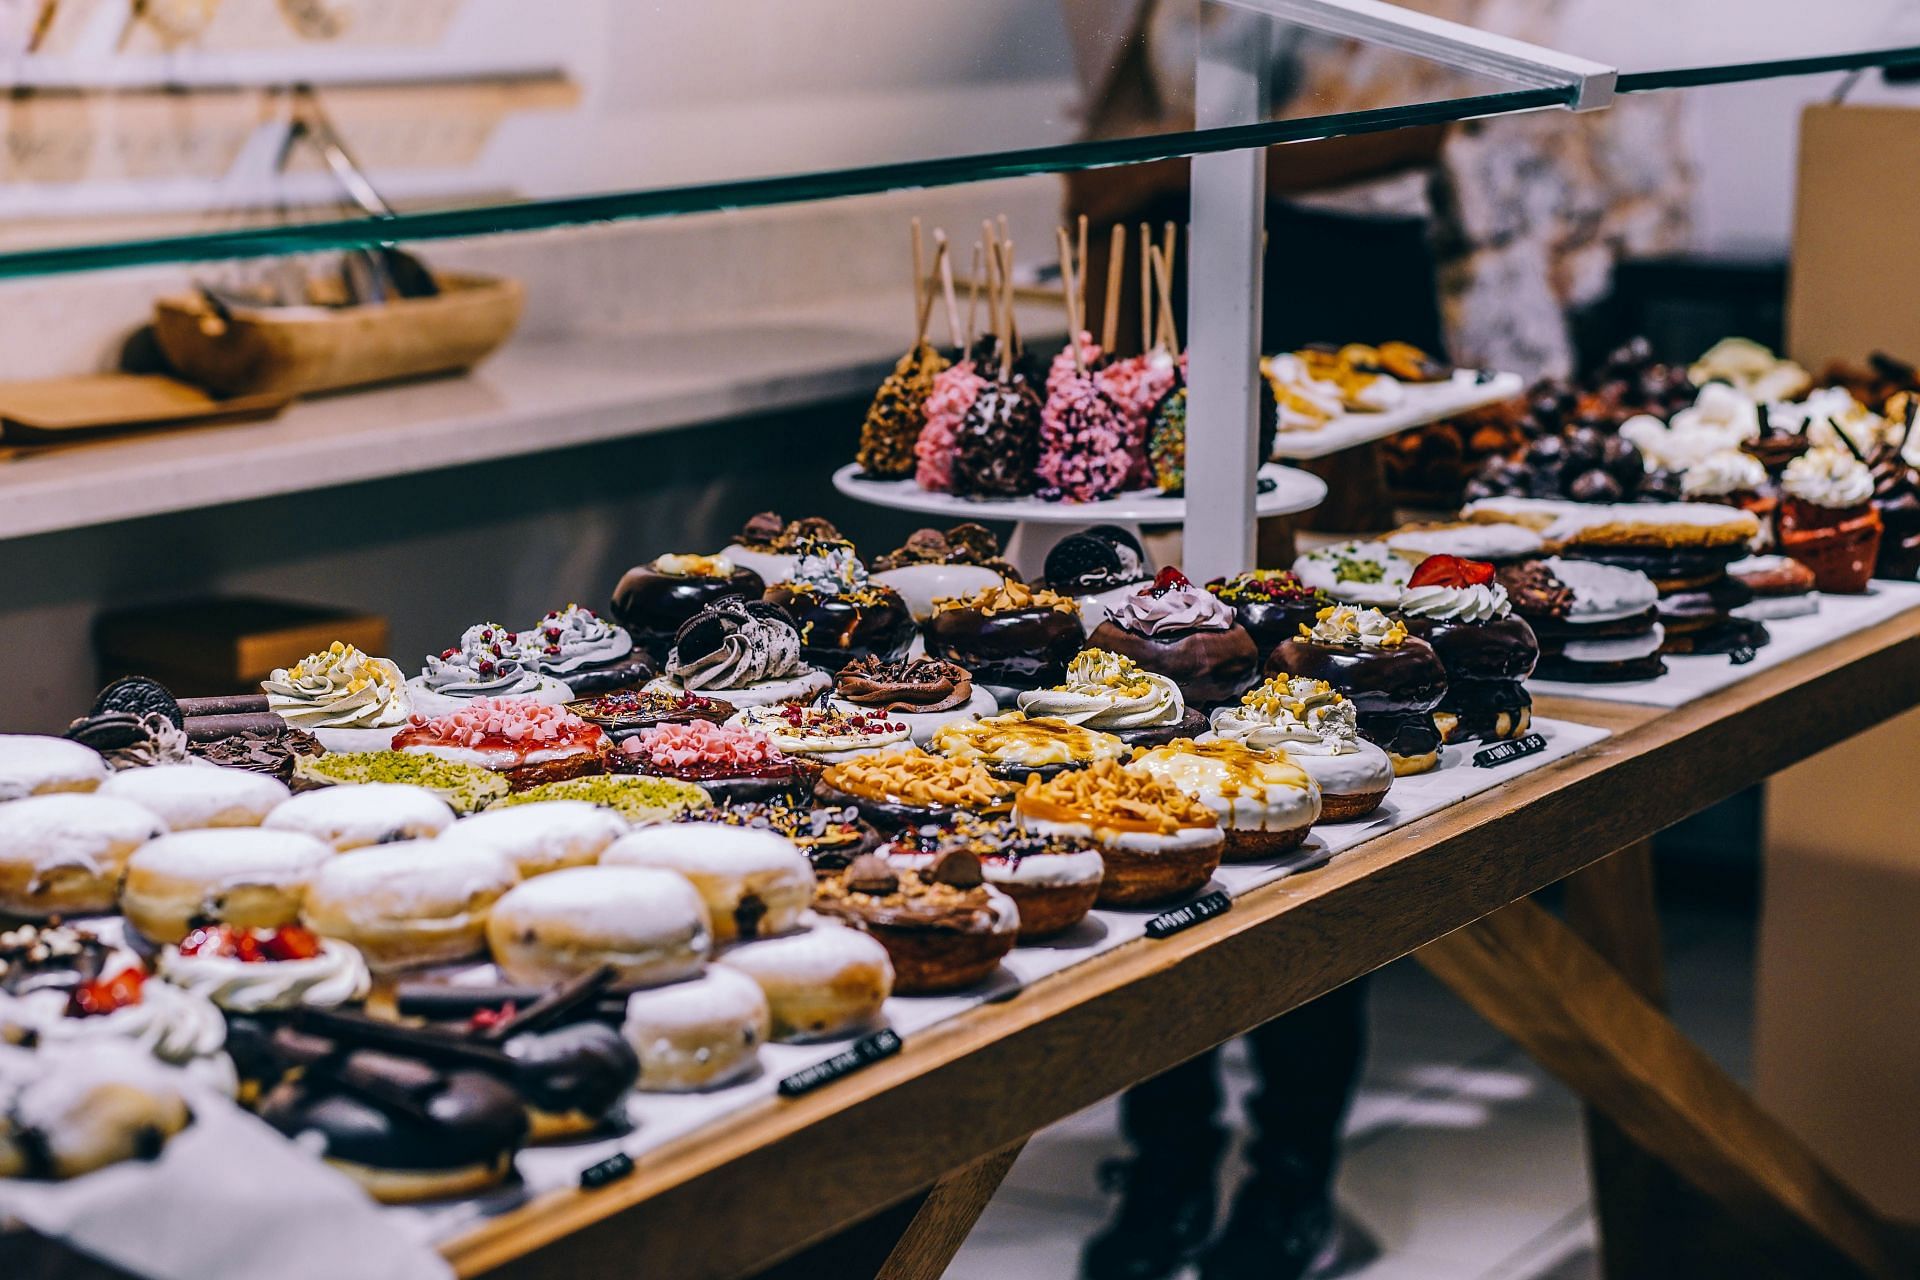 Image of various sugary snacks - be mindful of your sugar intake for better health (Image via Pexels)